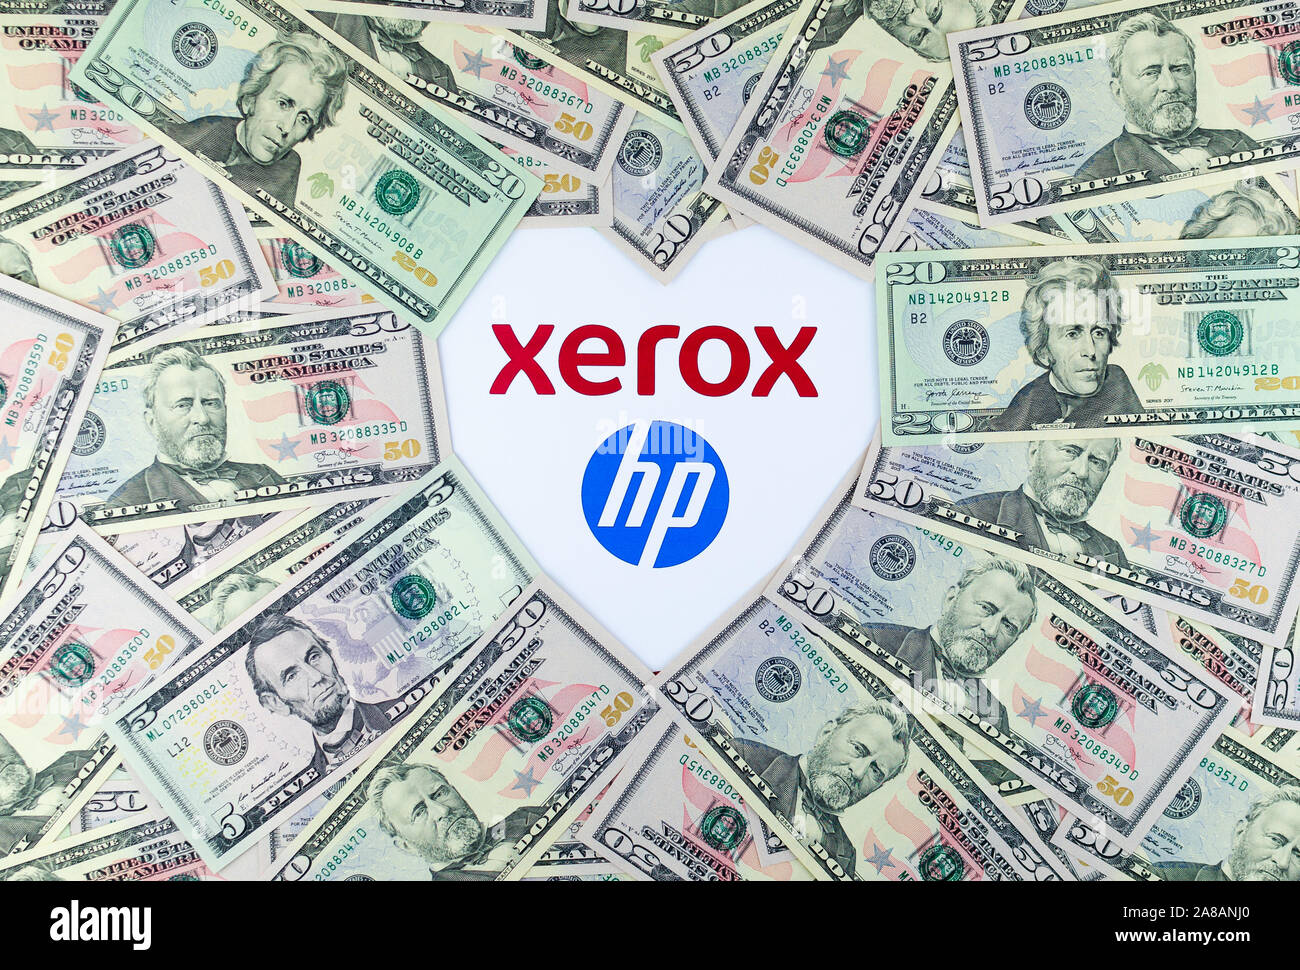 XEROX and HP logos on the paper brochure and dollar bills placed around in a shape of heart. Illustrative for the news about potential merger. Stock Photo